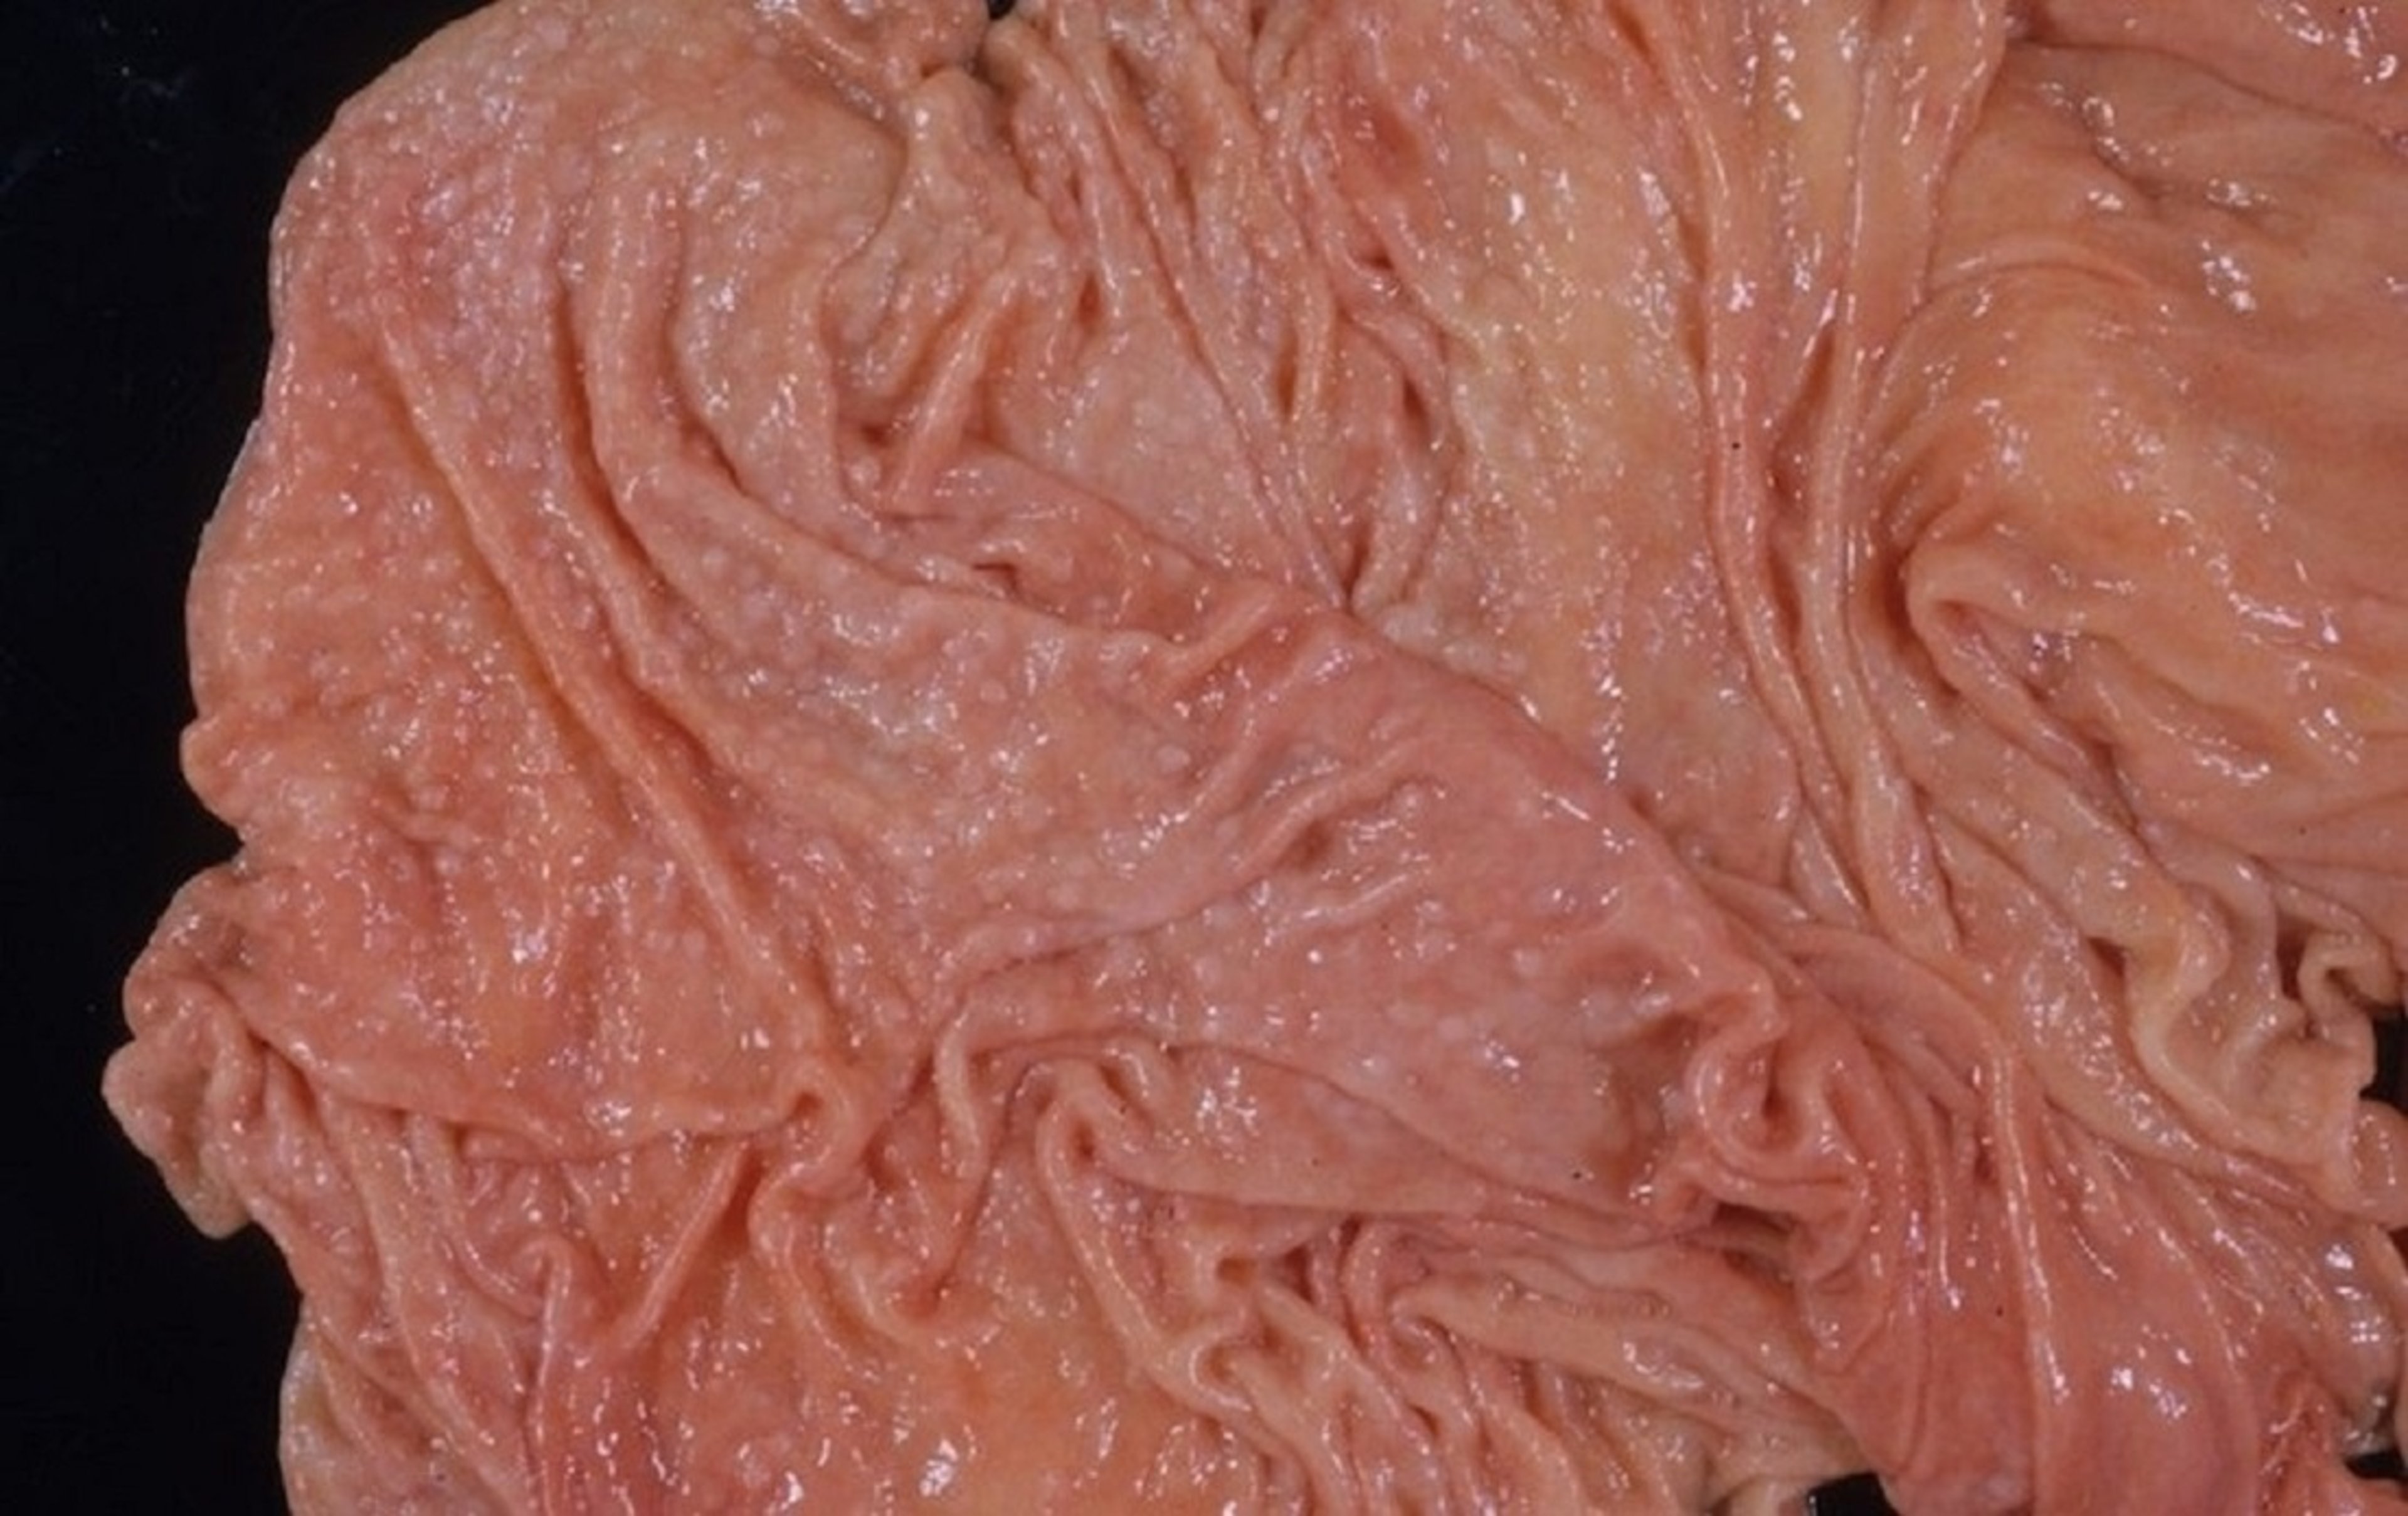 Abomasal lesions due to <i >Ostertagia</i>